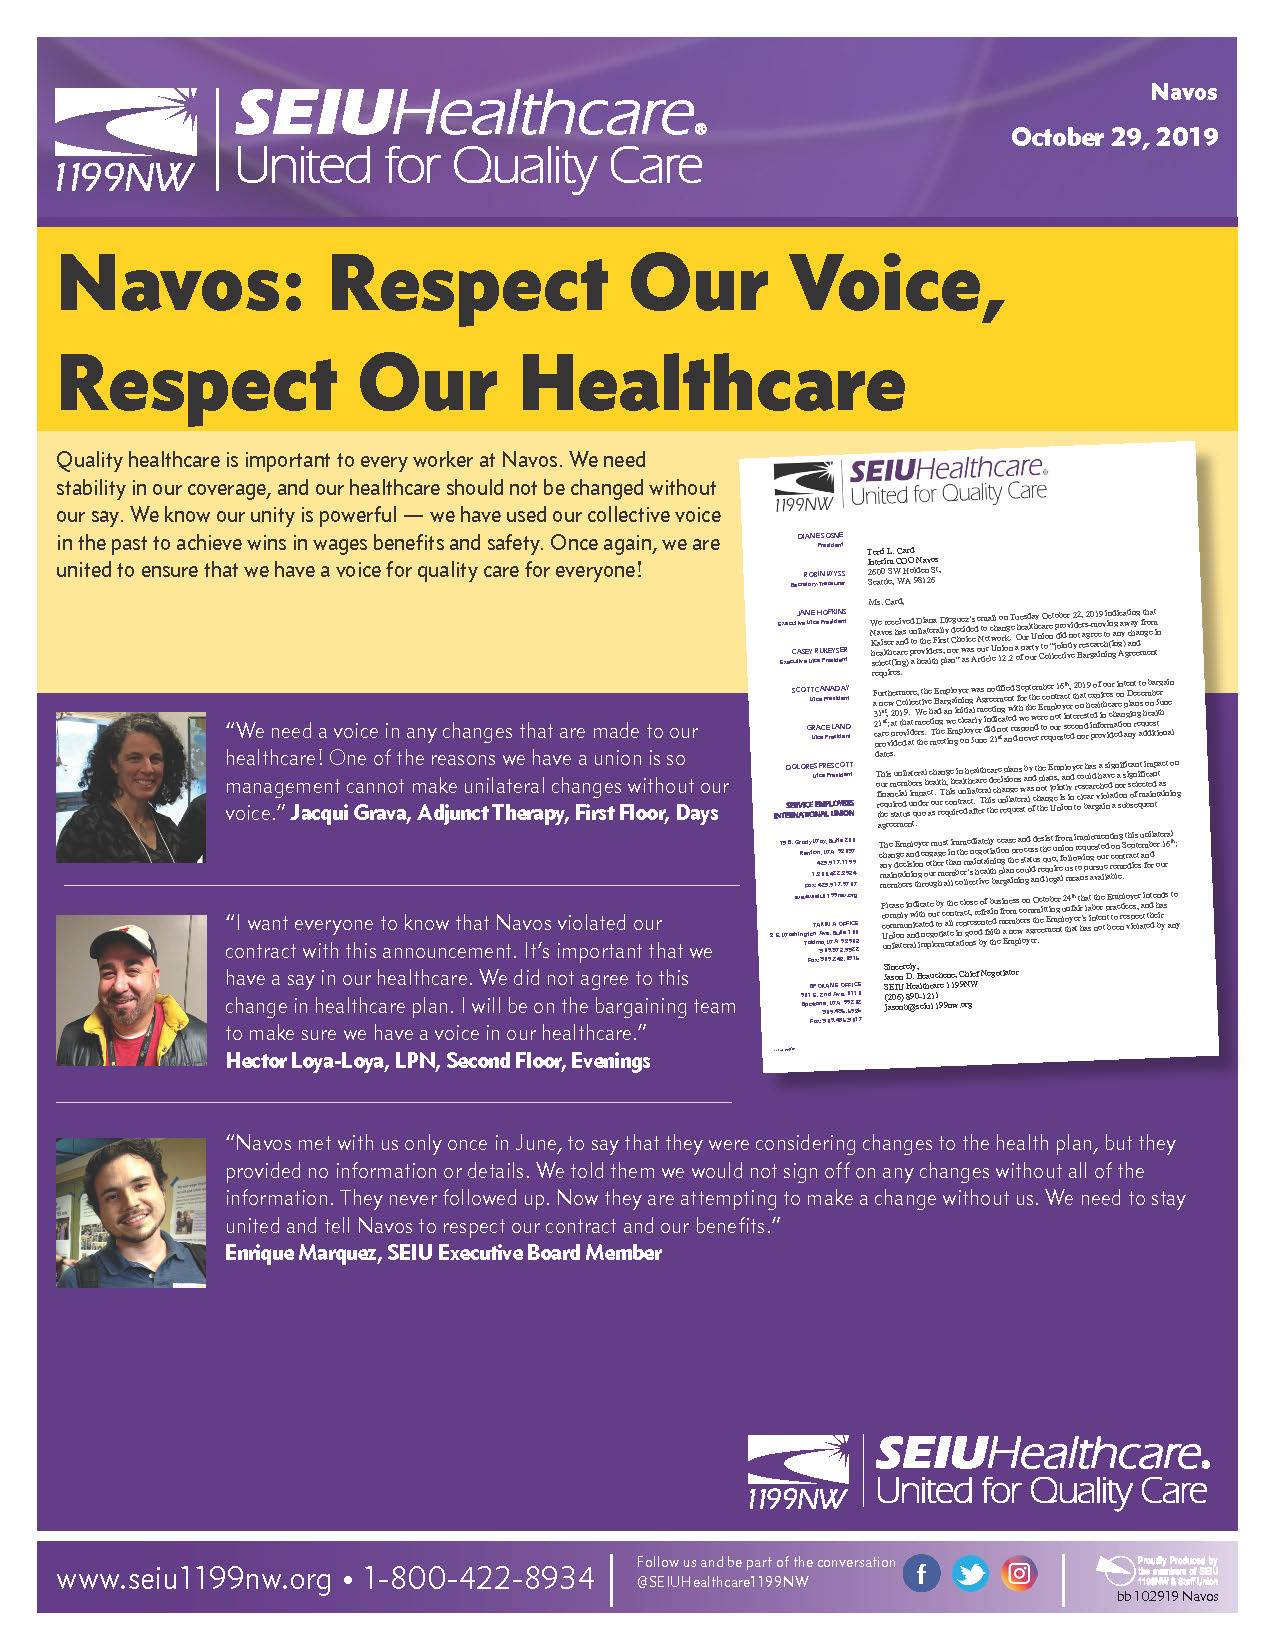 Navos: Respect Our Voice, Respect Our Healthcare